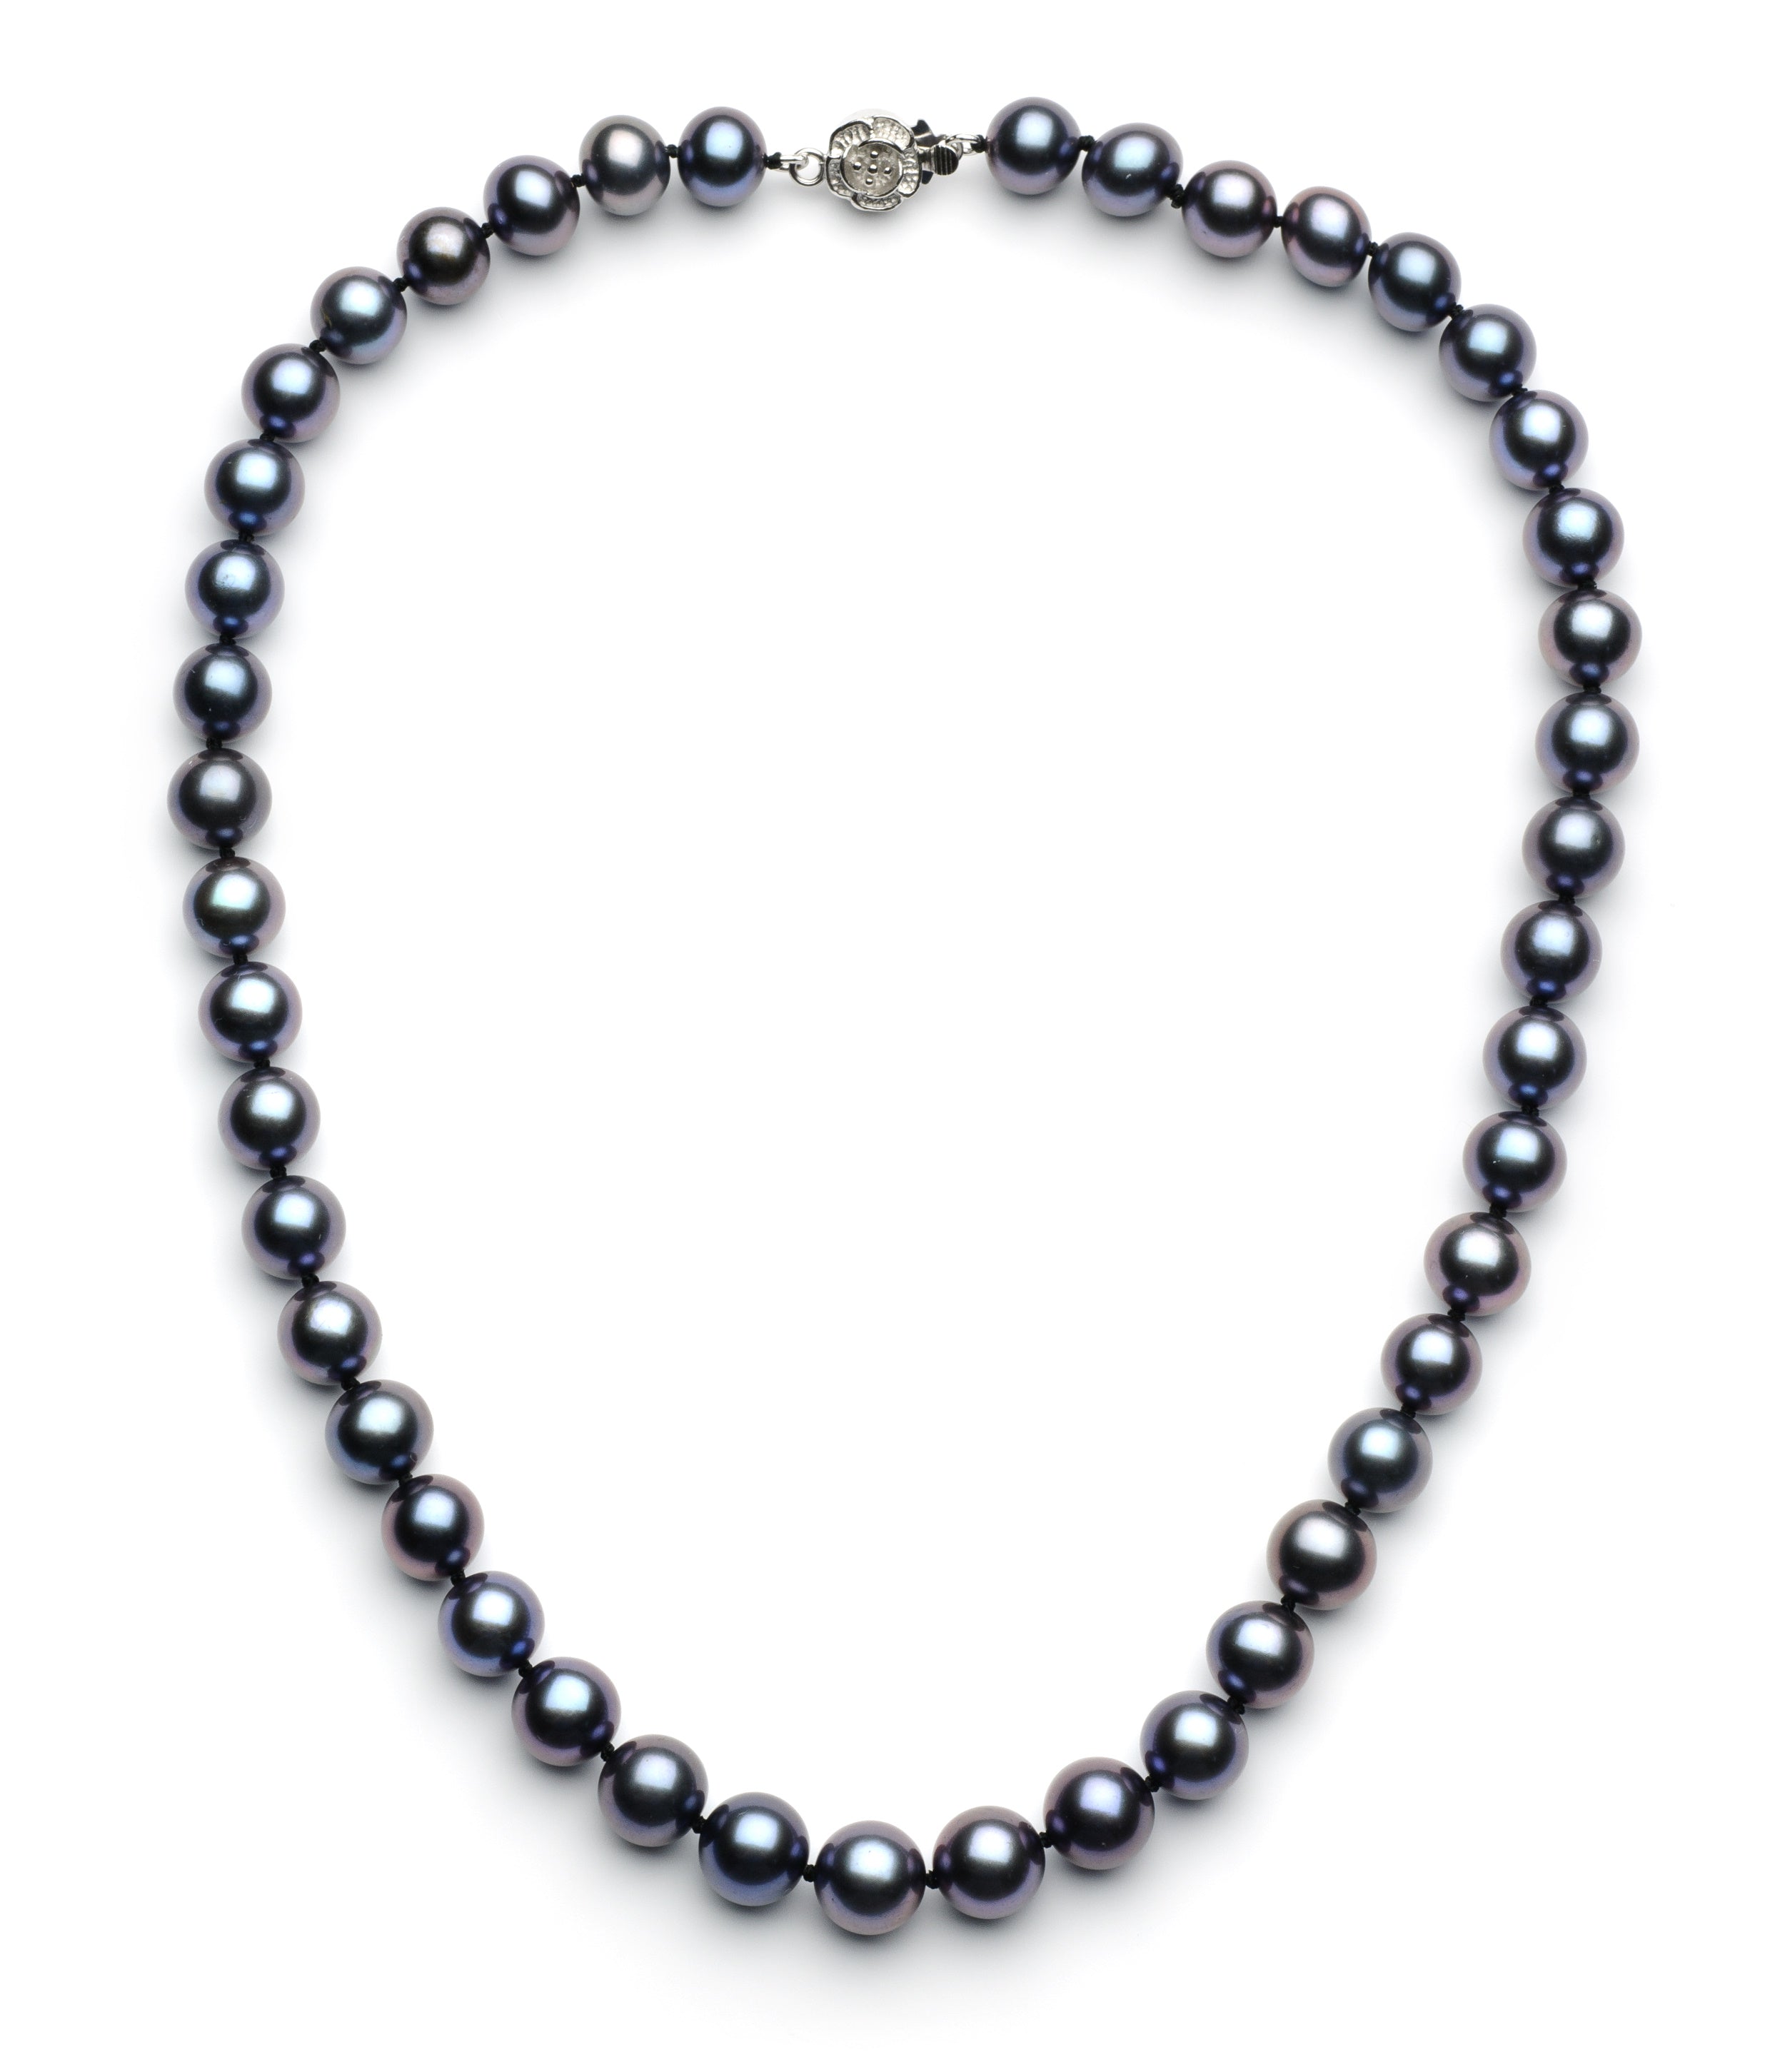 9.0 mm Black Freshwater Pearl Necklace